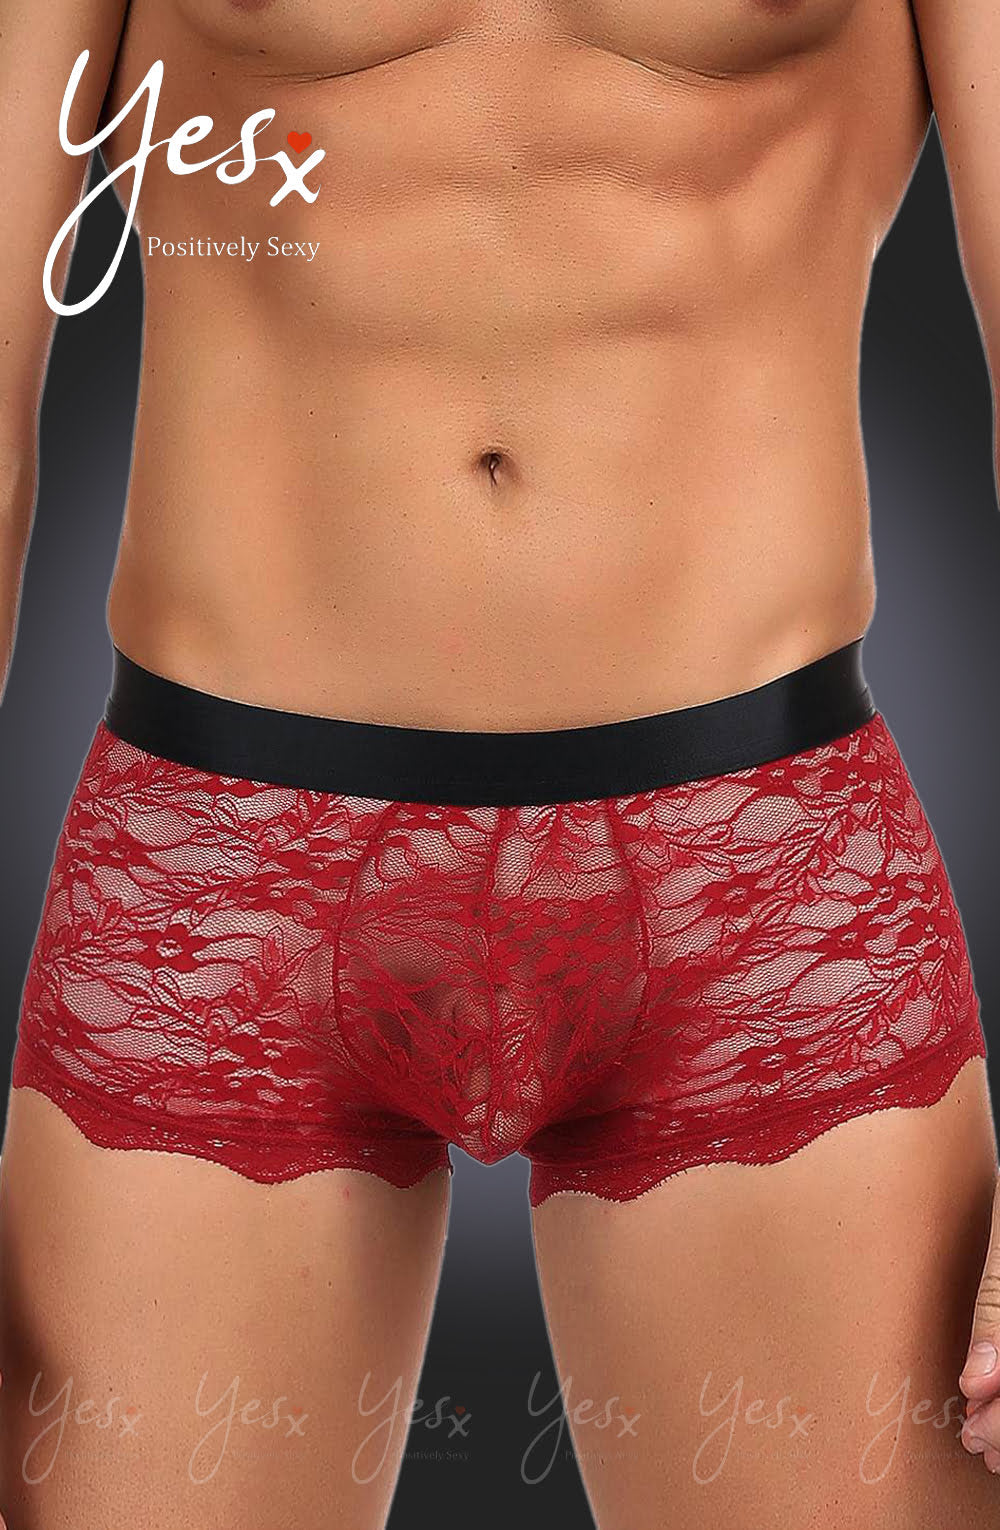 YesX YX976 Men's Boxer Brief in Vibrant Red Lace